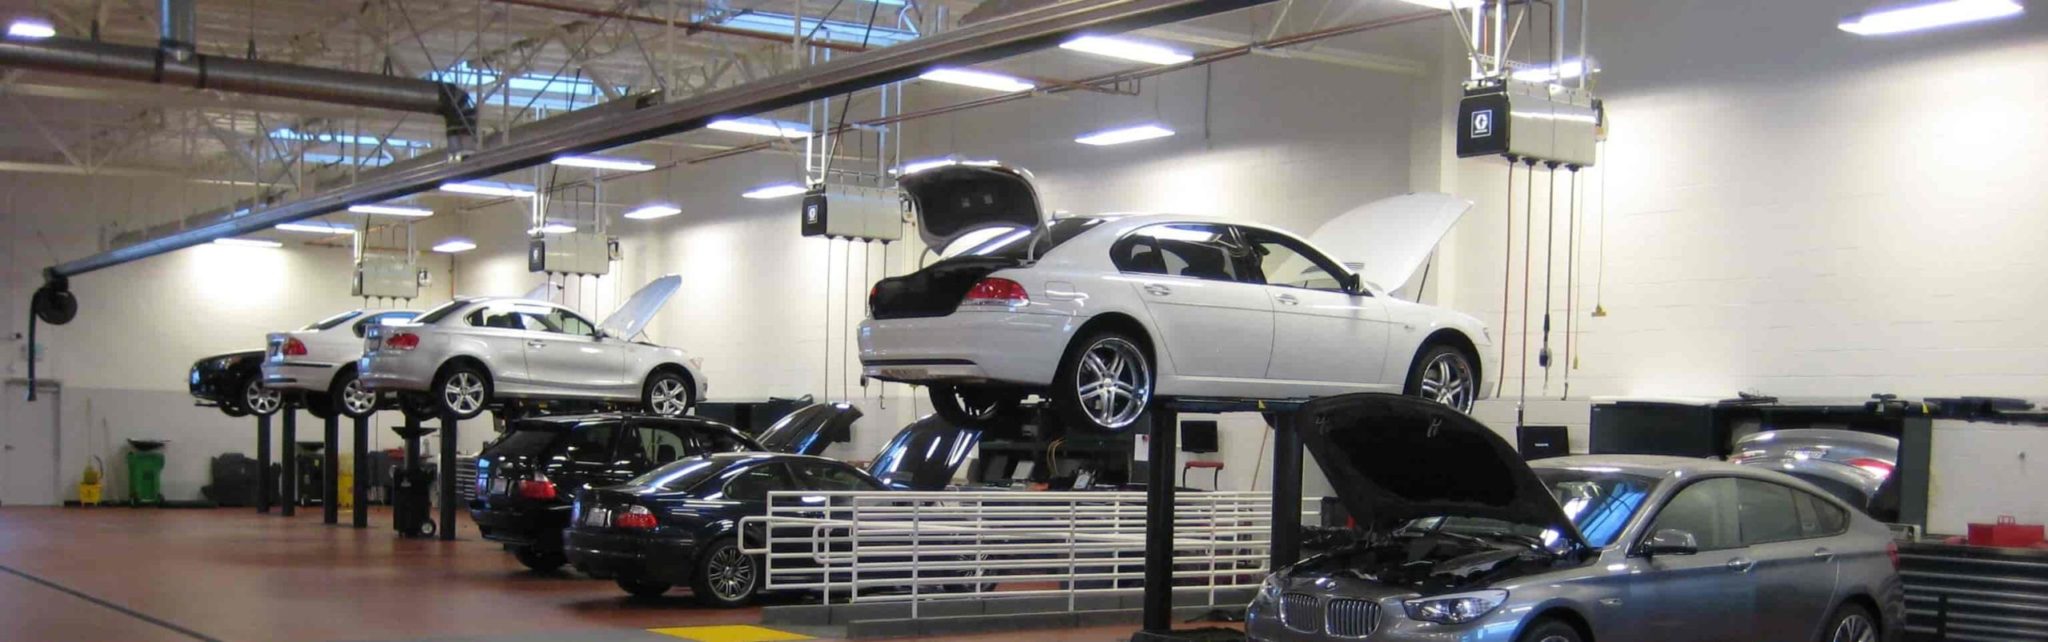 Reasons Why Your Car Needs A Tune-Up At Fixed Intervals